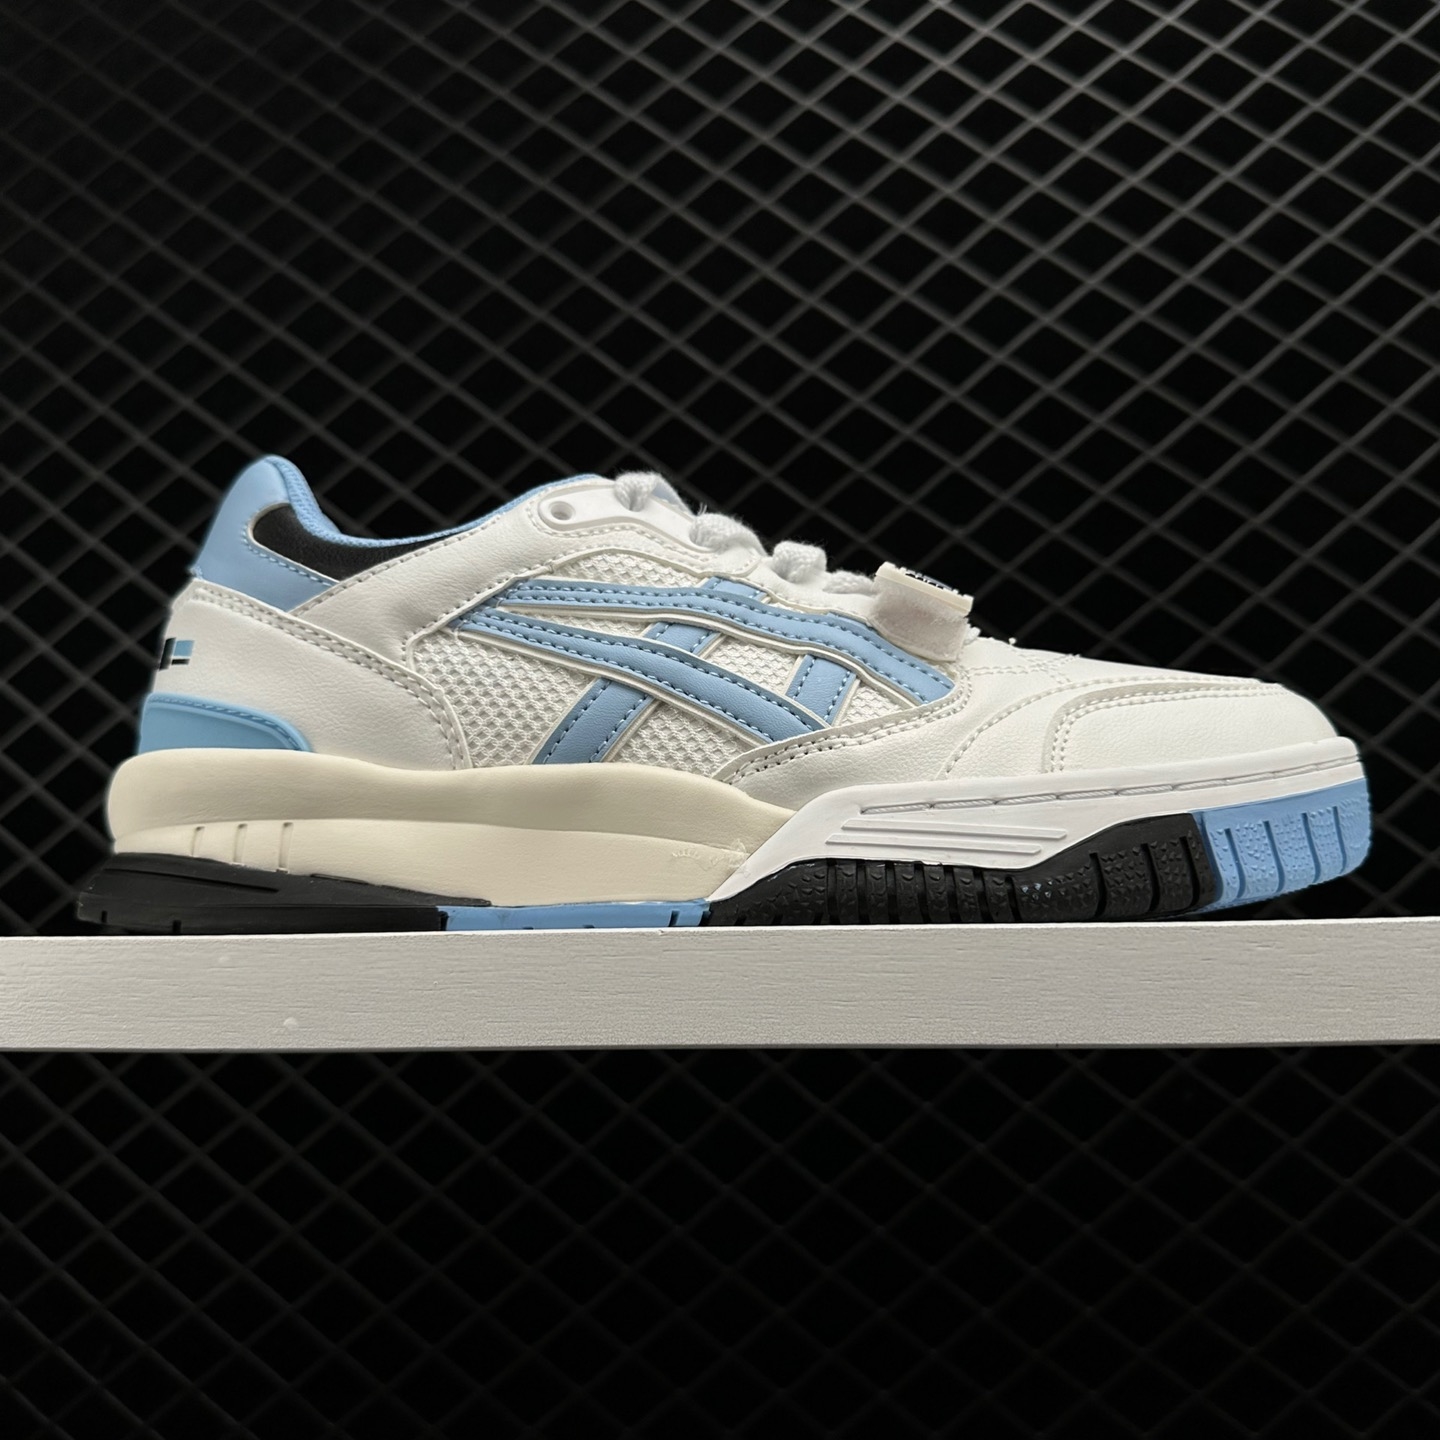 Asics Gel-Spotlyte Low V2 'White Blue' 1203A258-103 - Premium Sneakers for Athletic Performance